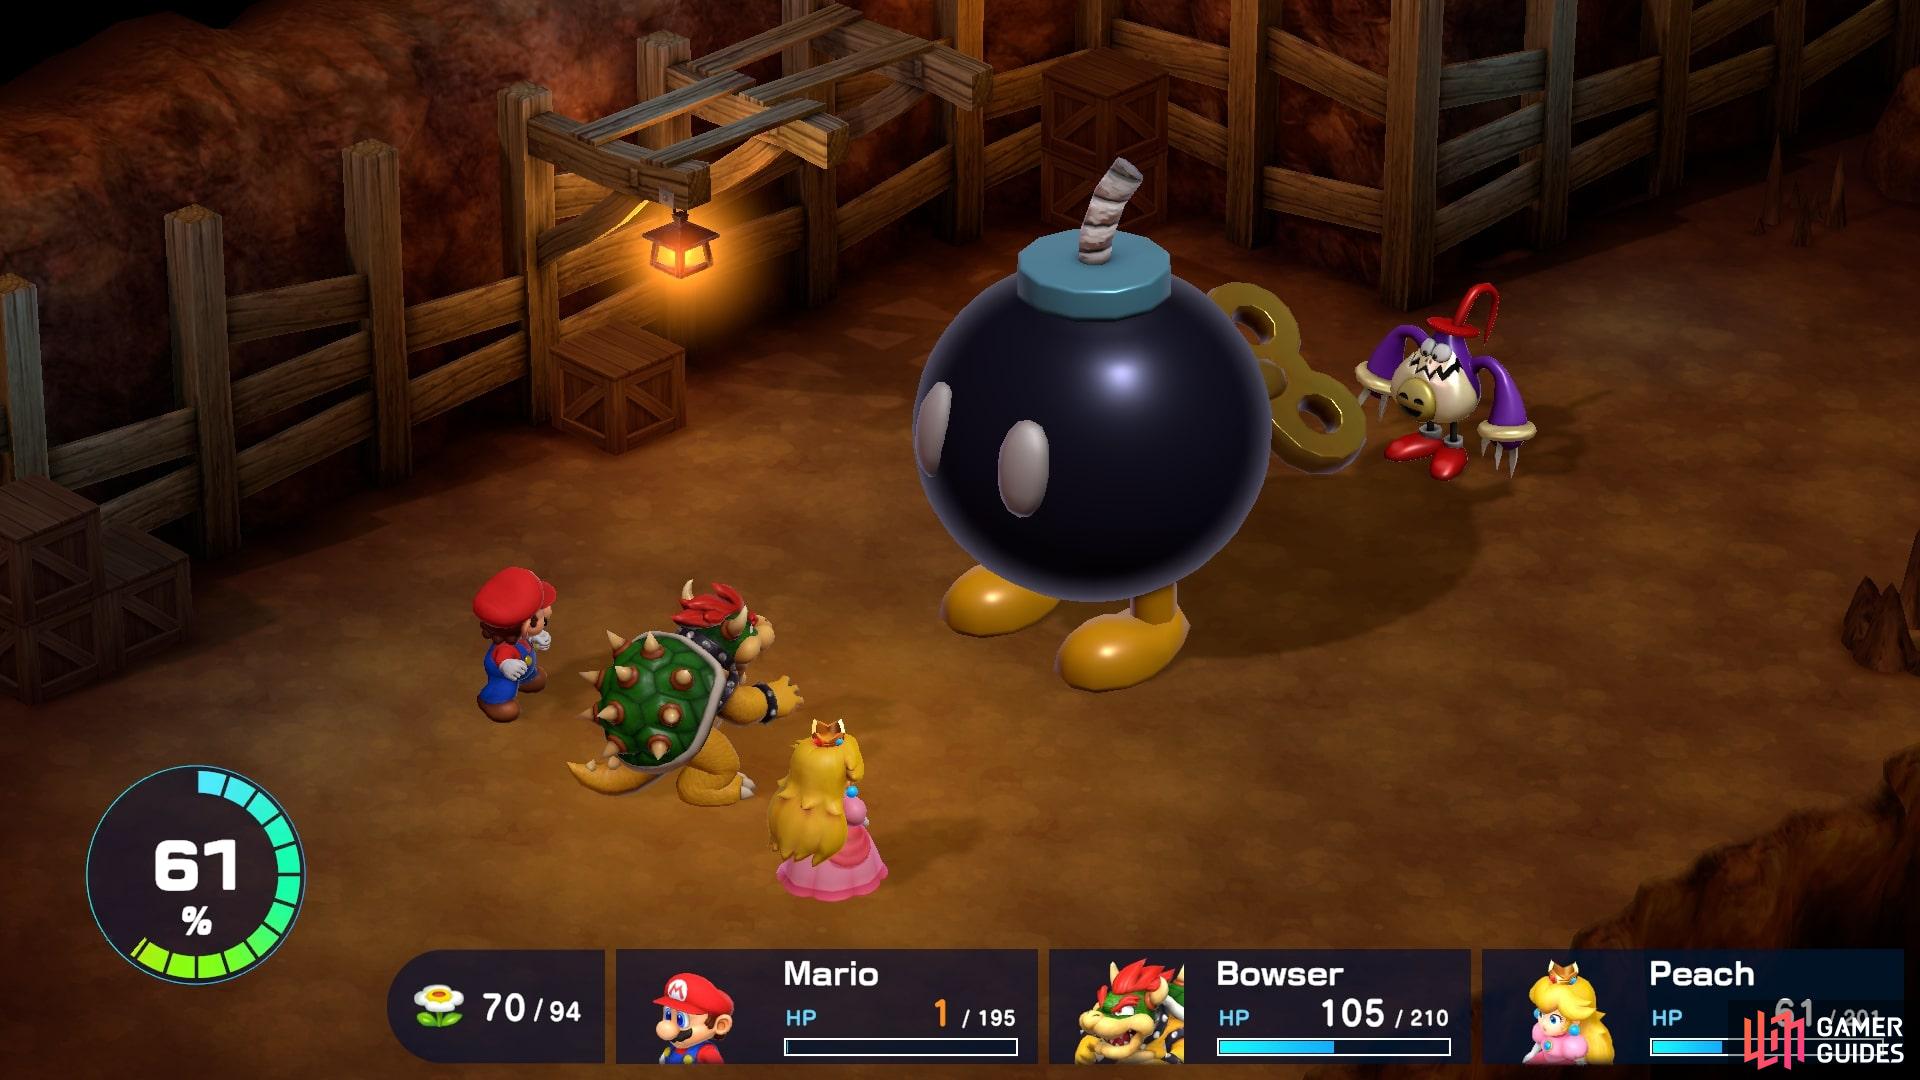 At the end of the fight Punchinello will summon a giant Bomb-omb that turns on him.